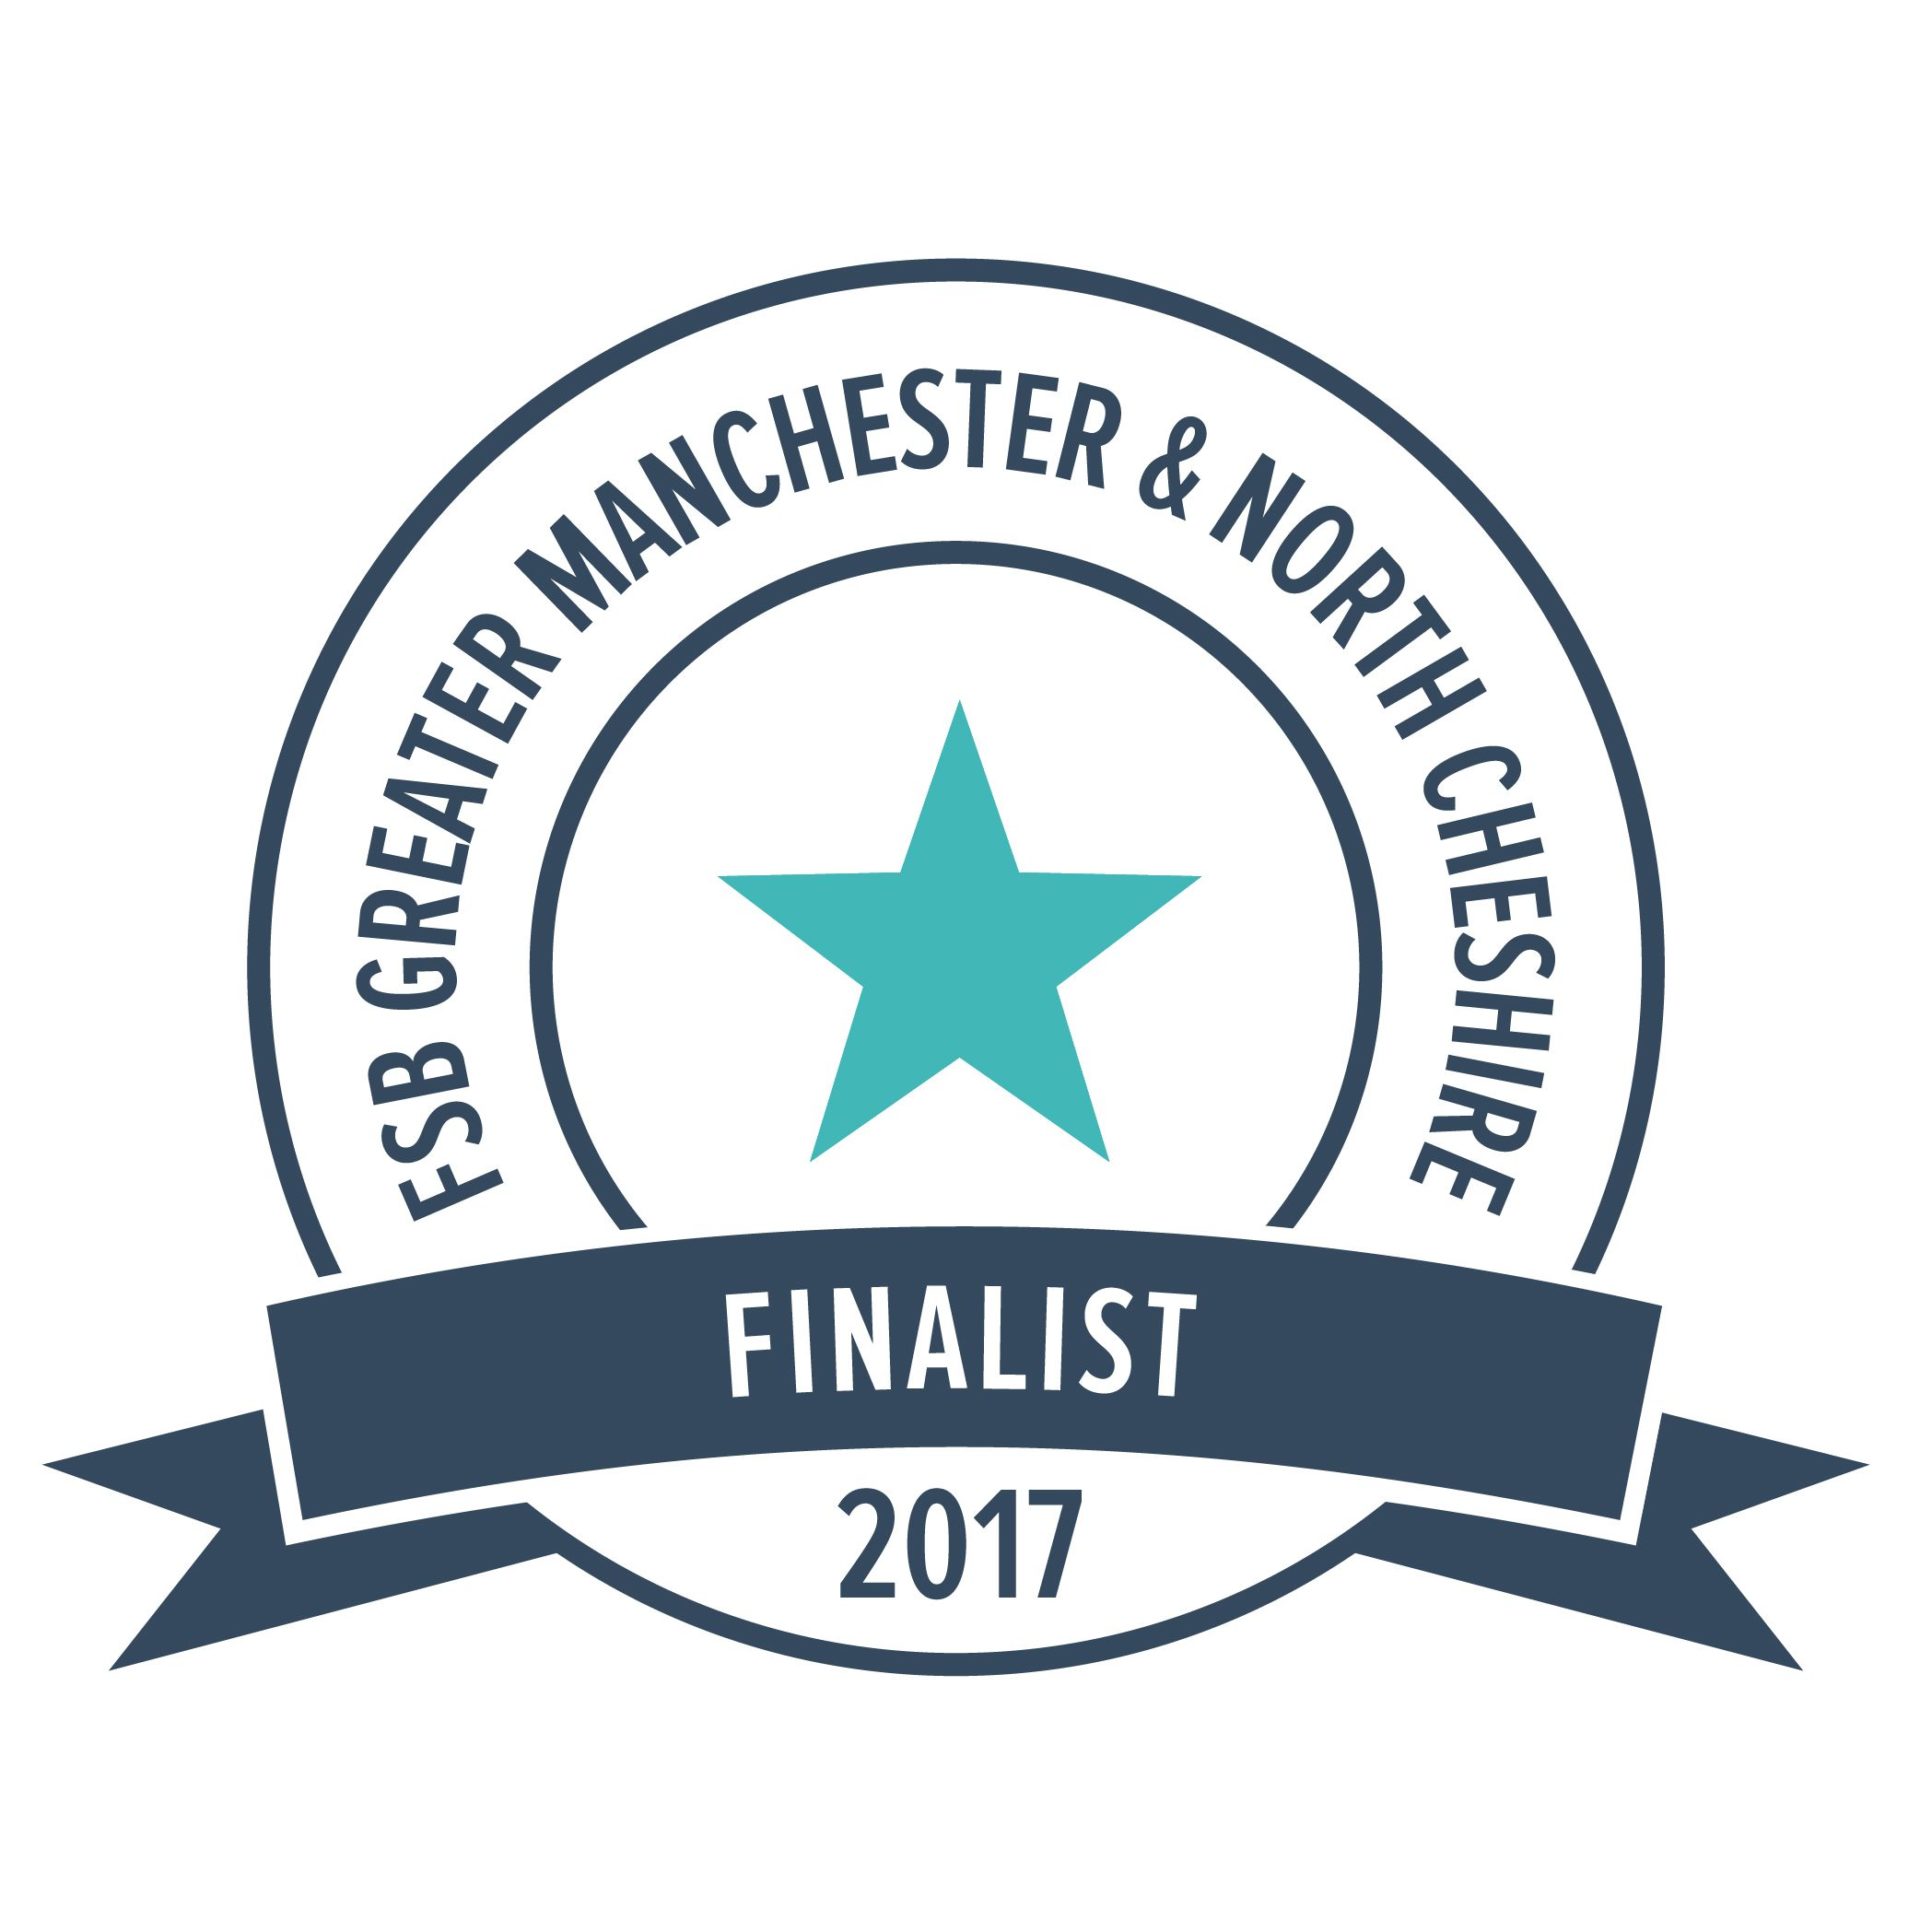 The Defence Works Shortlisted for “Technology Business of the Year” in FSB Manchester Awards